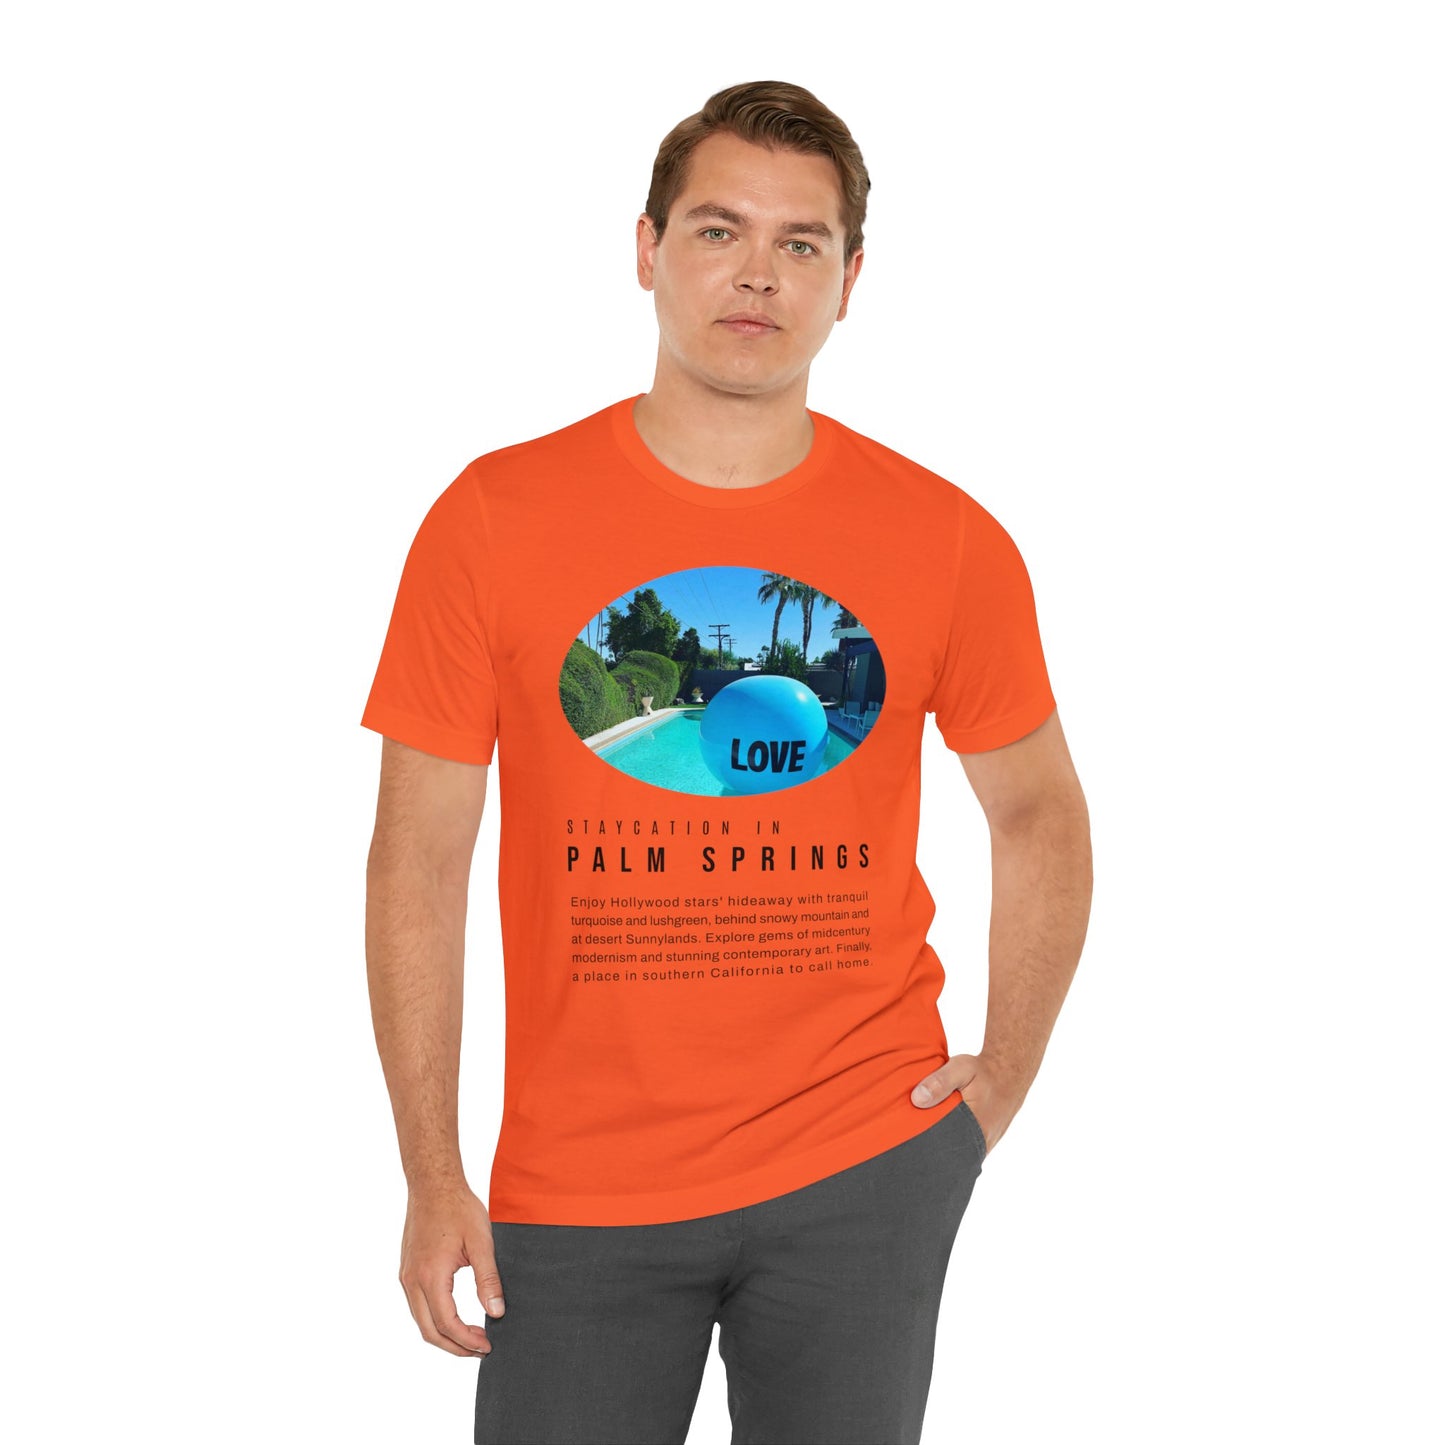 Staycation in Palm Springs Premium Lifestyle Tee by ViralDestinations